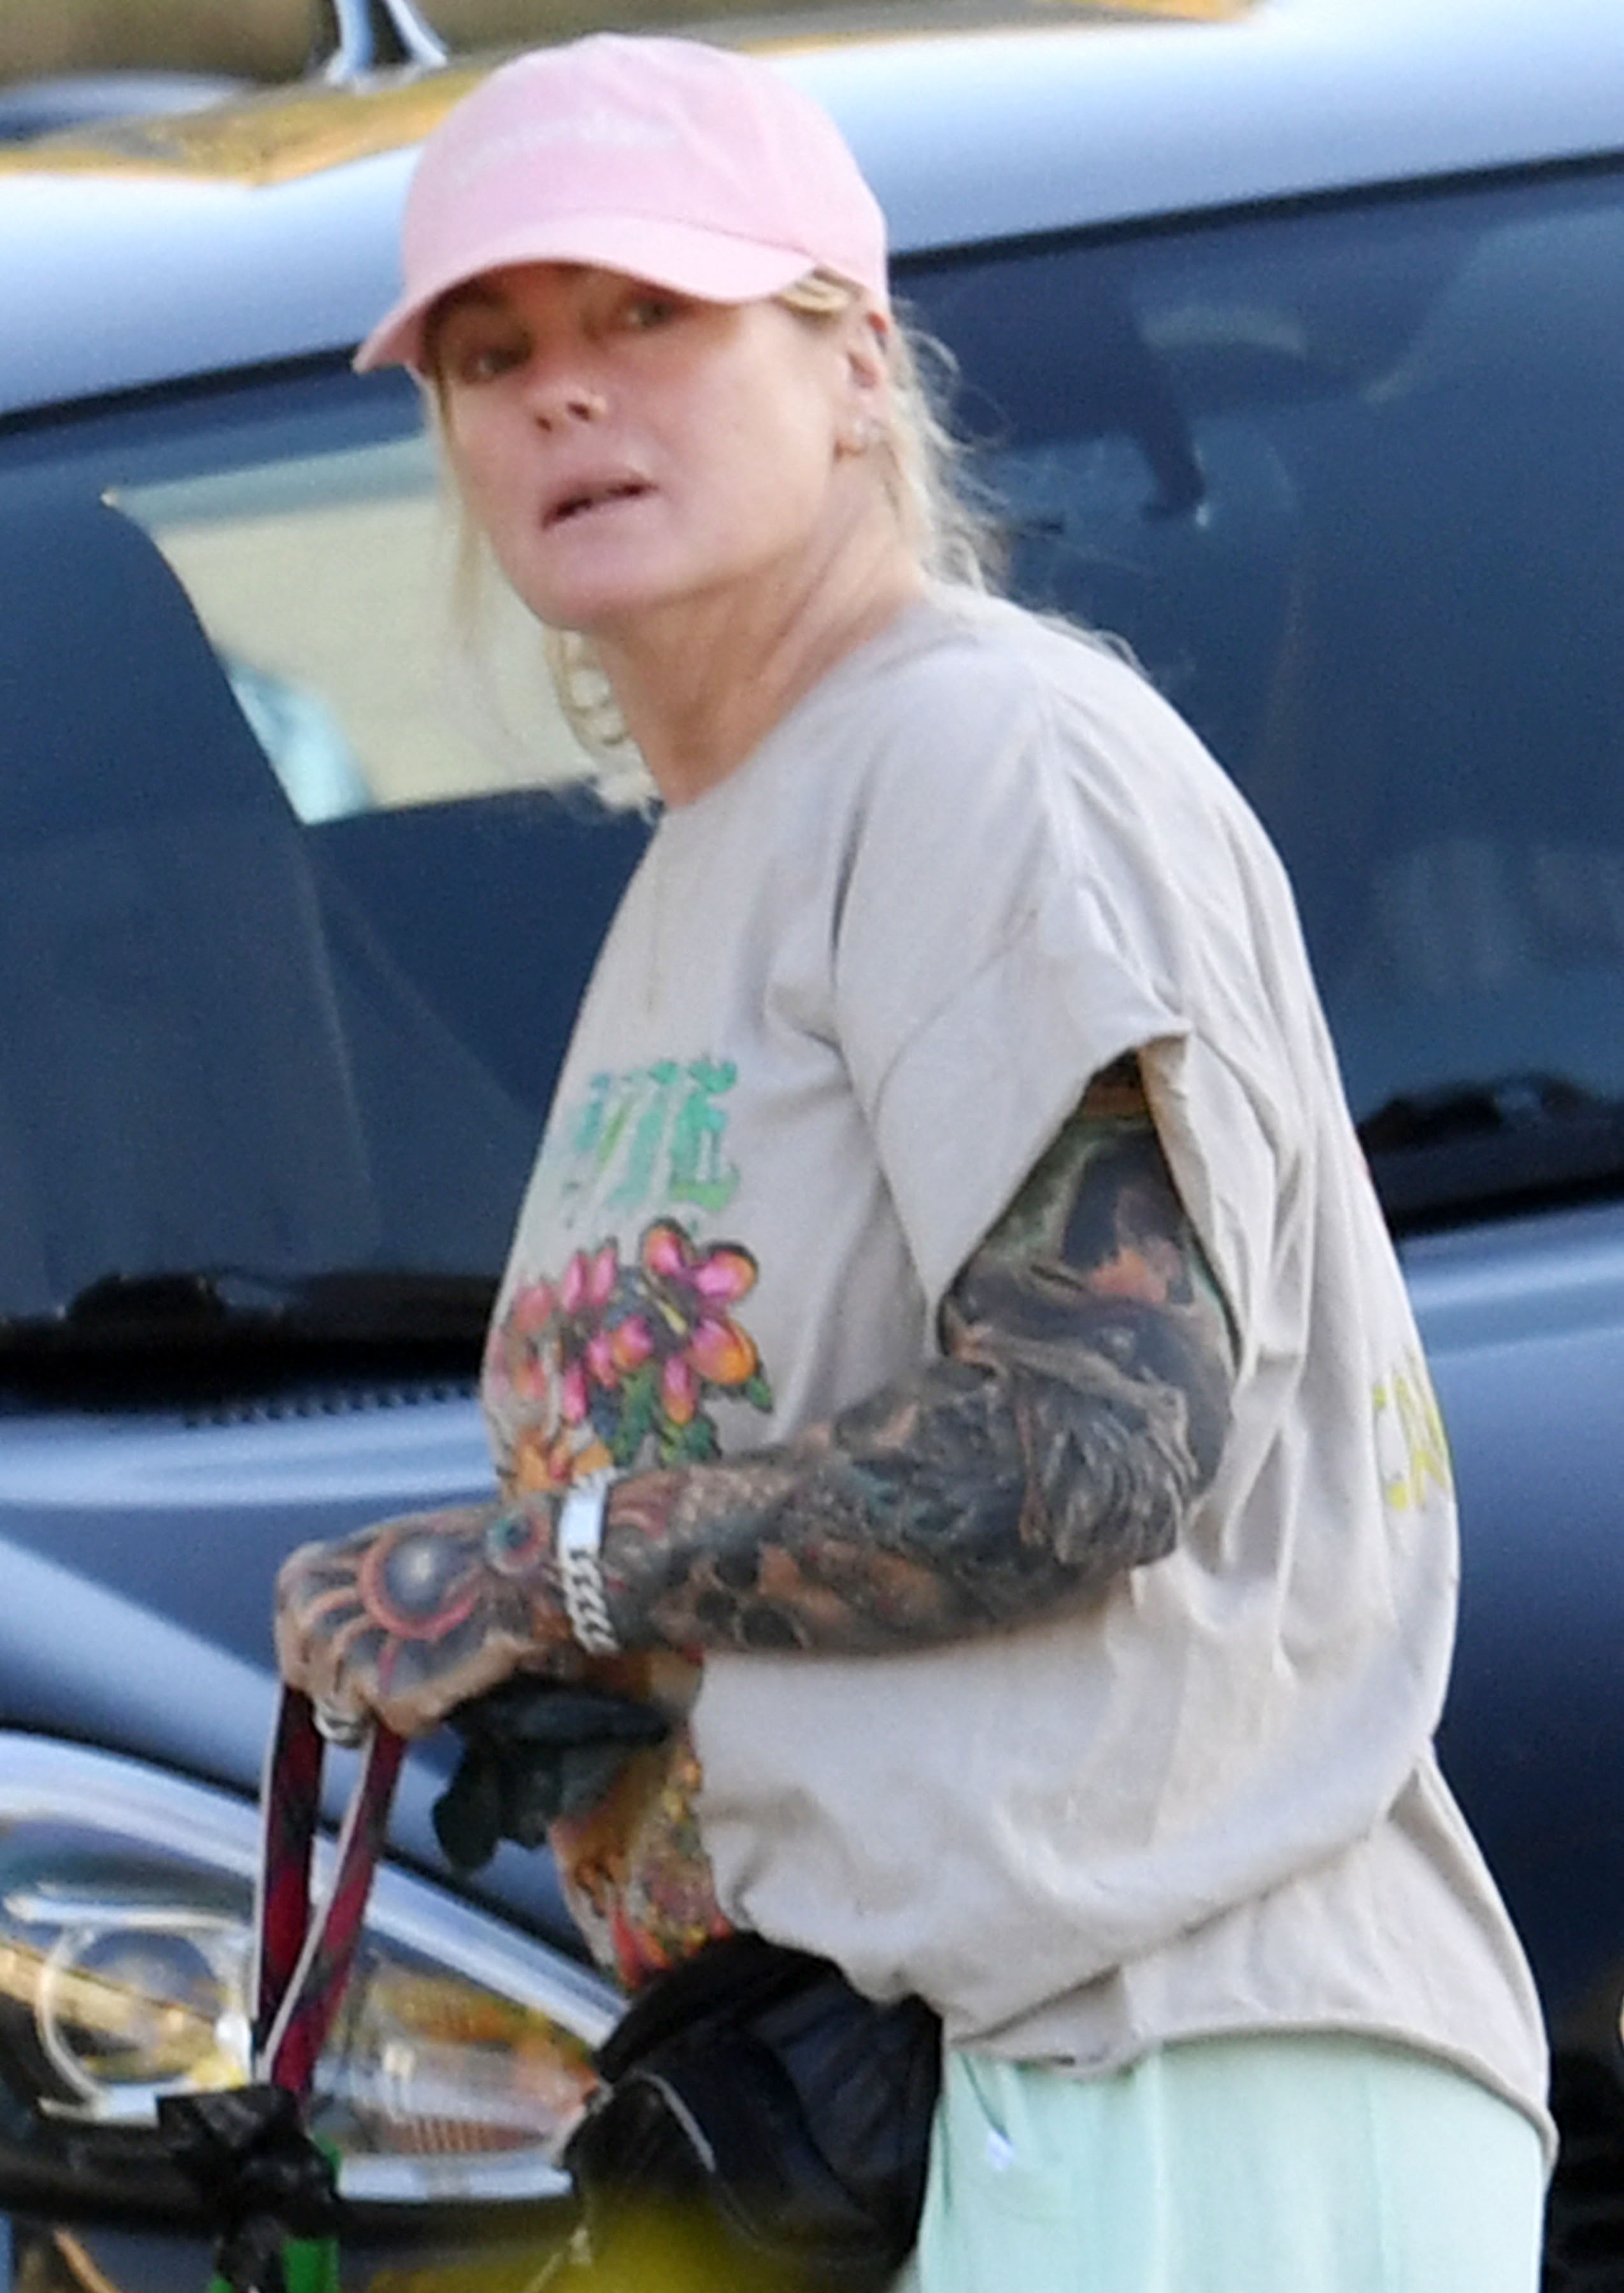 The 54-year-old looked totally different with huge tattoos and sweats